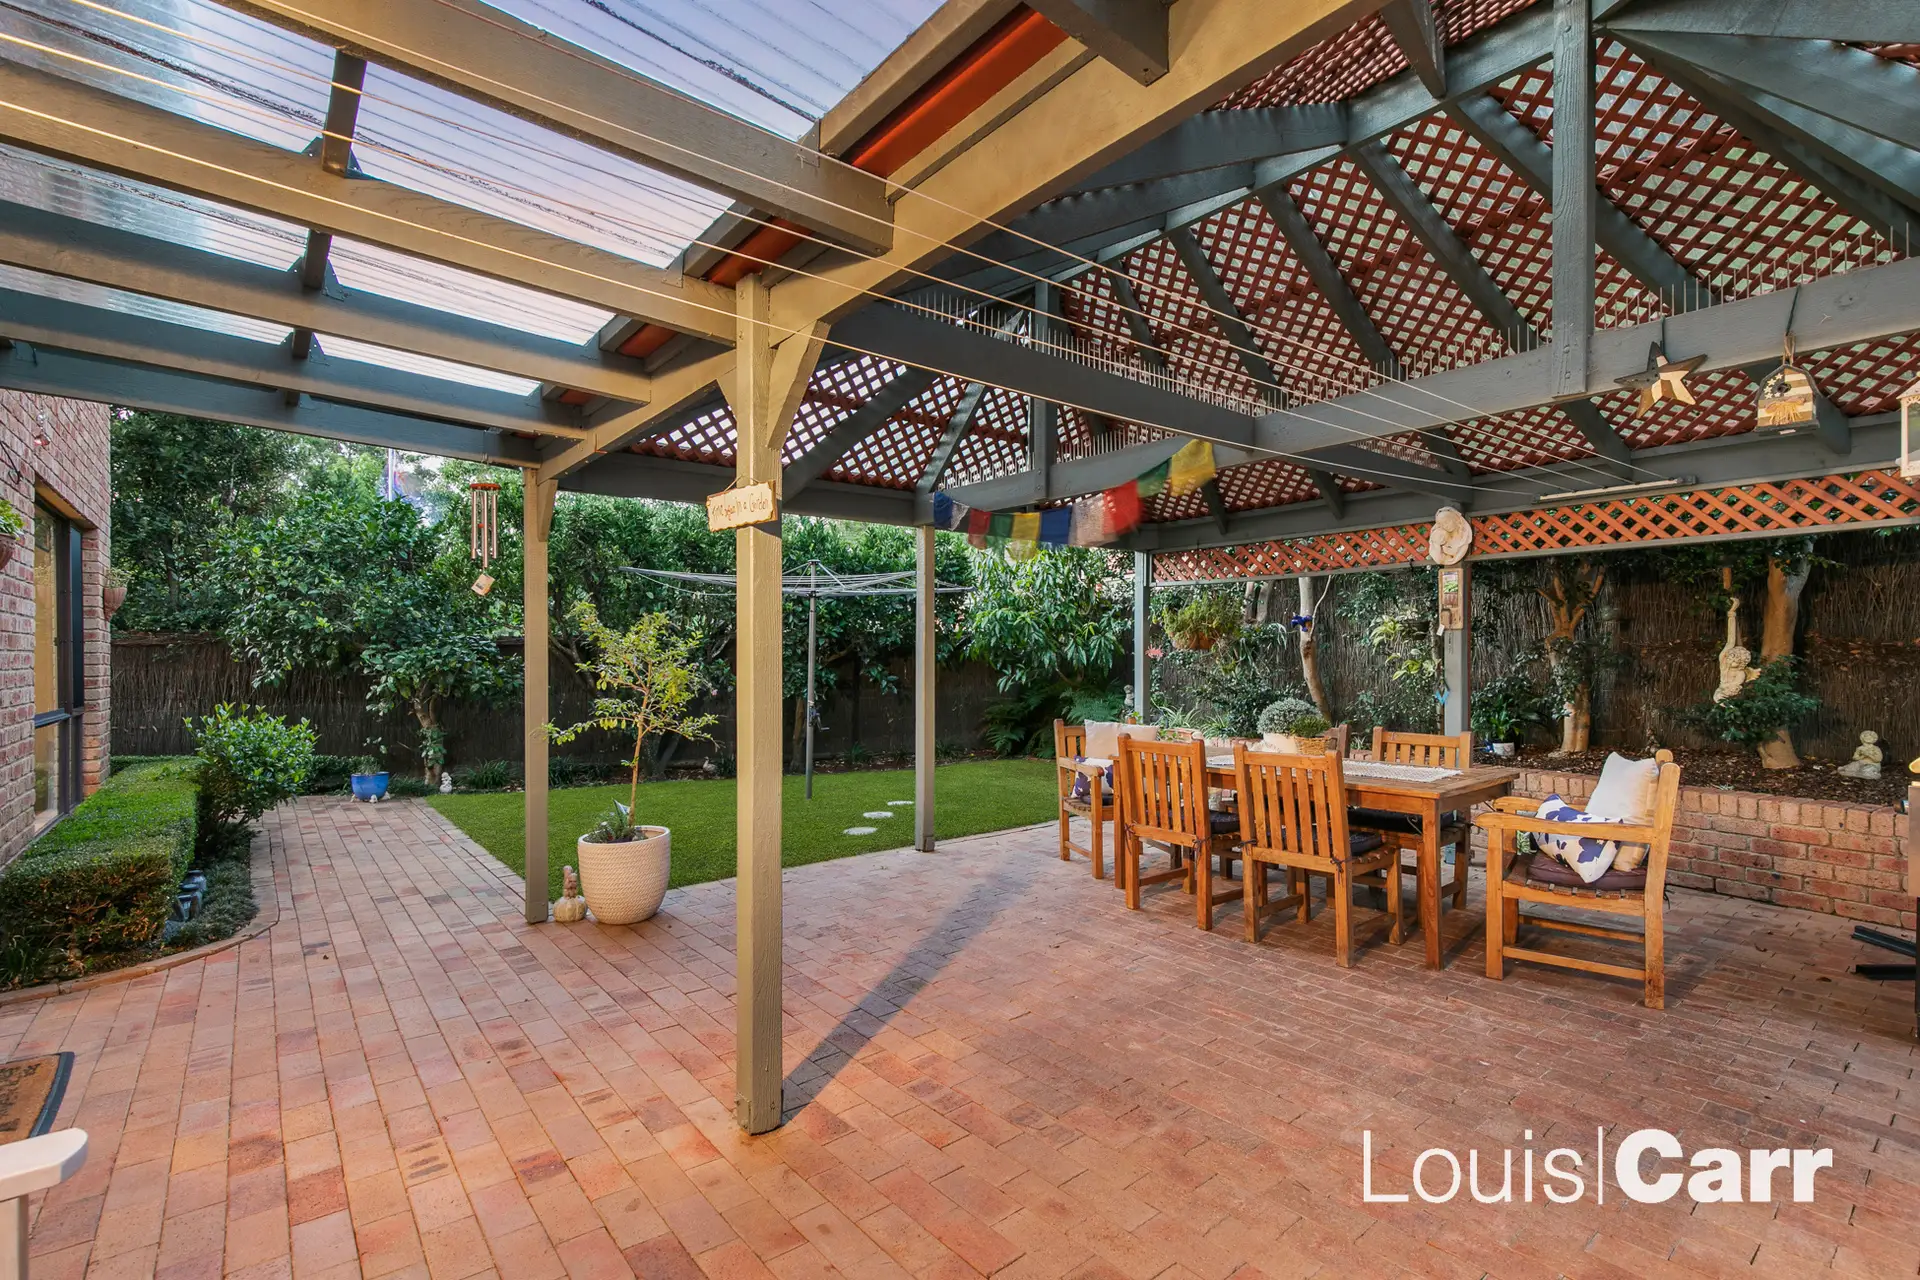 Photo #10: 4 Lorikeet Way, West Pennant Hills - Sold by Louis Carr Real Estate